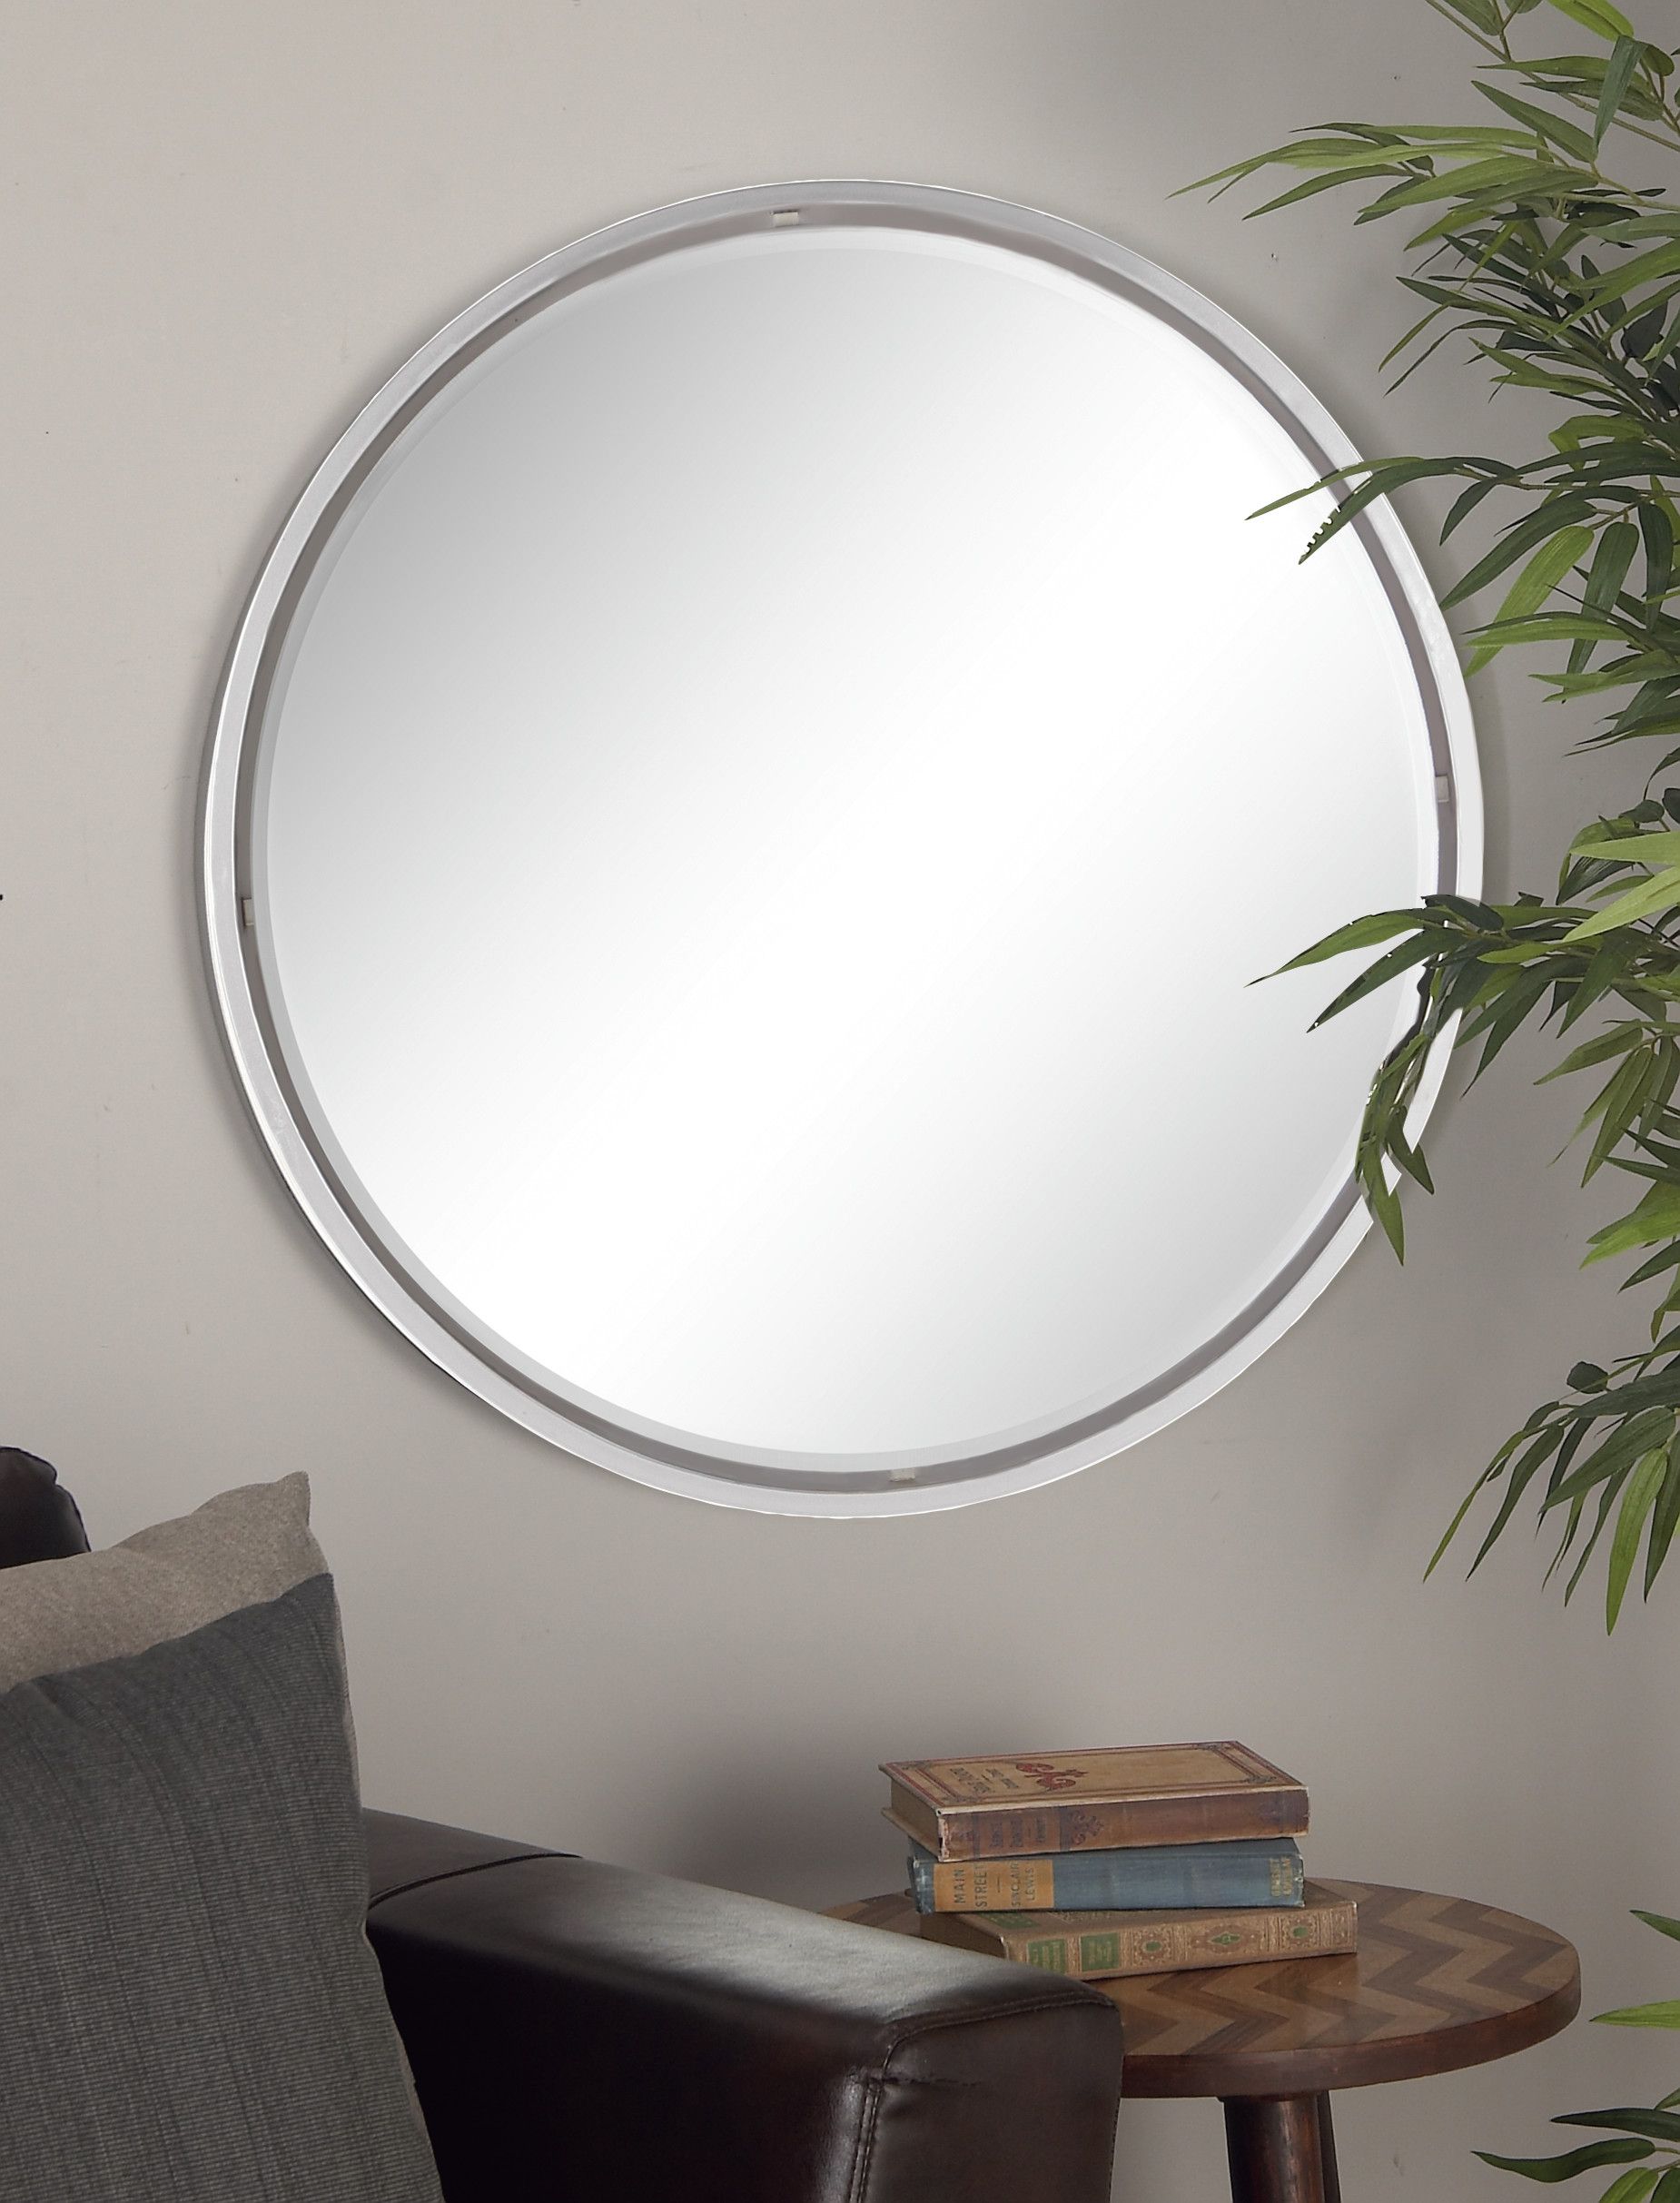 Decmode Extra Large Round Silver Wall Mirror, 30" – Walmart Pertaining To Round Scalloped Wall Mirrors (View 1 of 15)